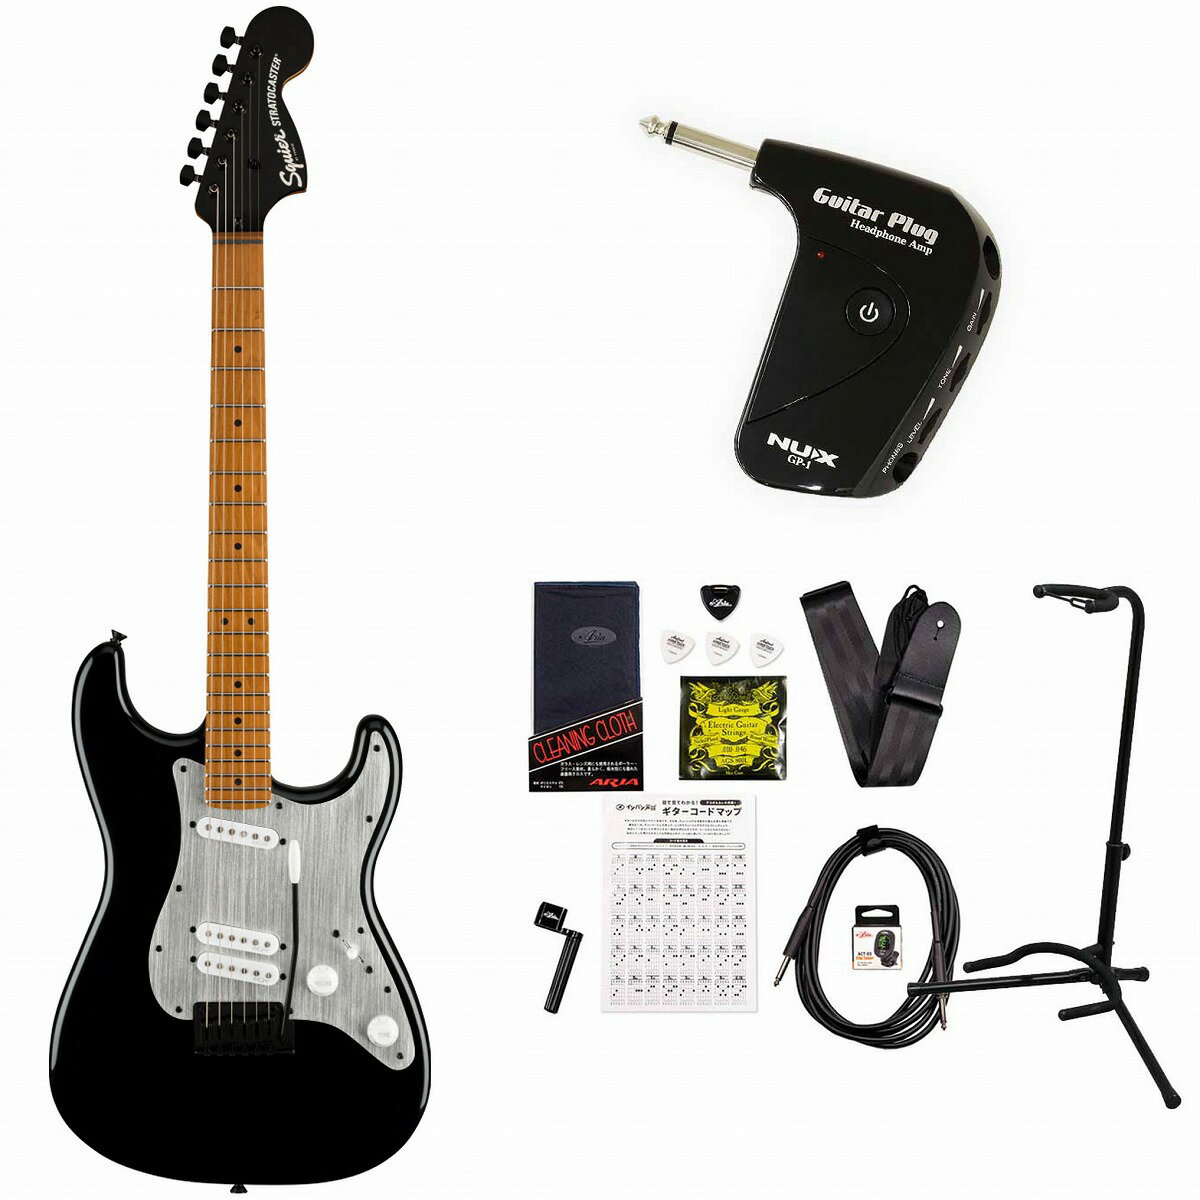 Squier / Contemporary Stratocaster Special Roasted Silver Anodized Pickguard Black GP-1アンプ付属エレキギター初心者セット【YRK】《 4582600680067》